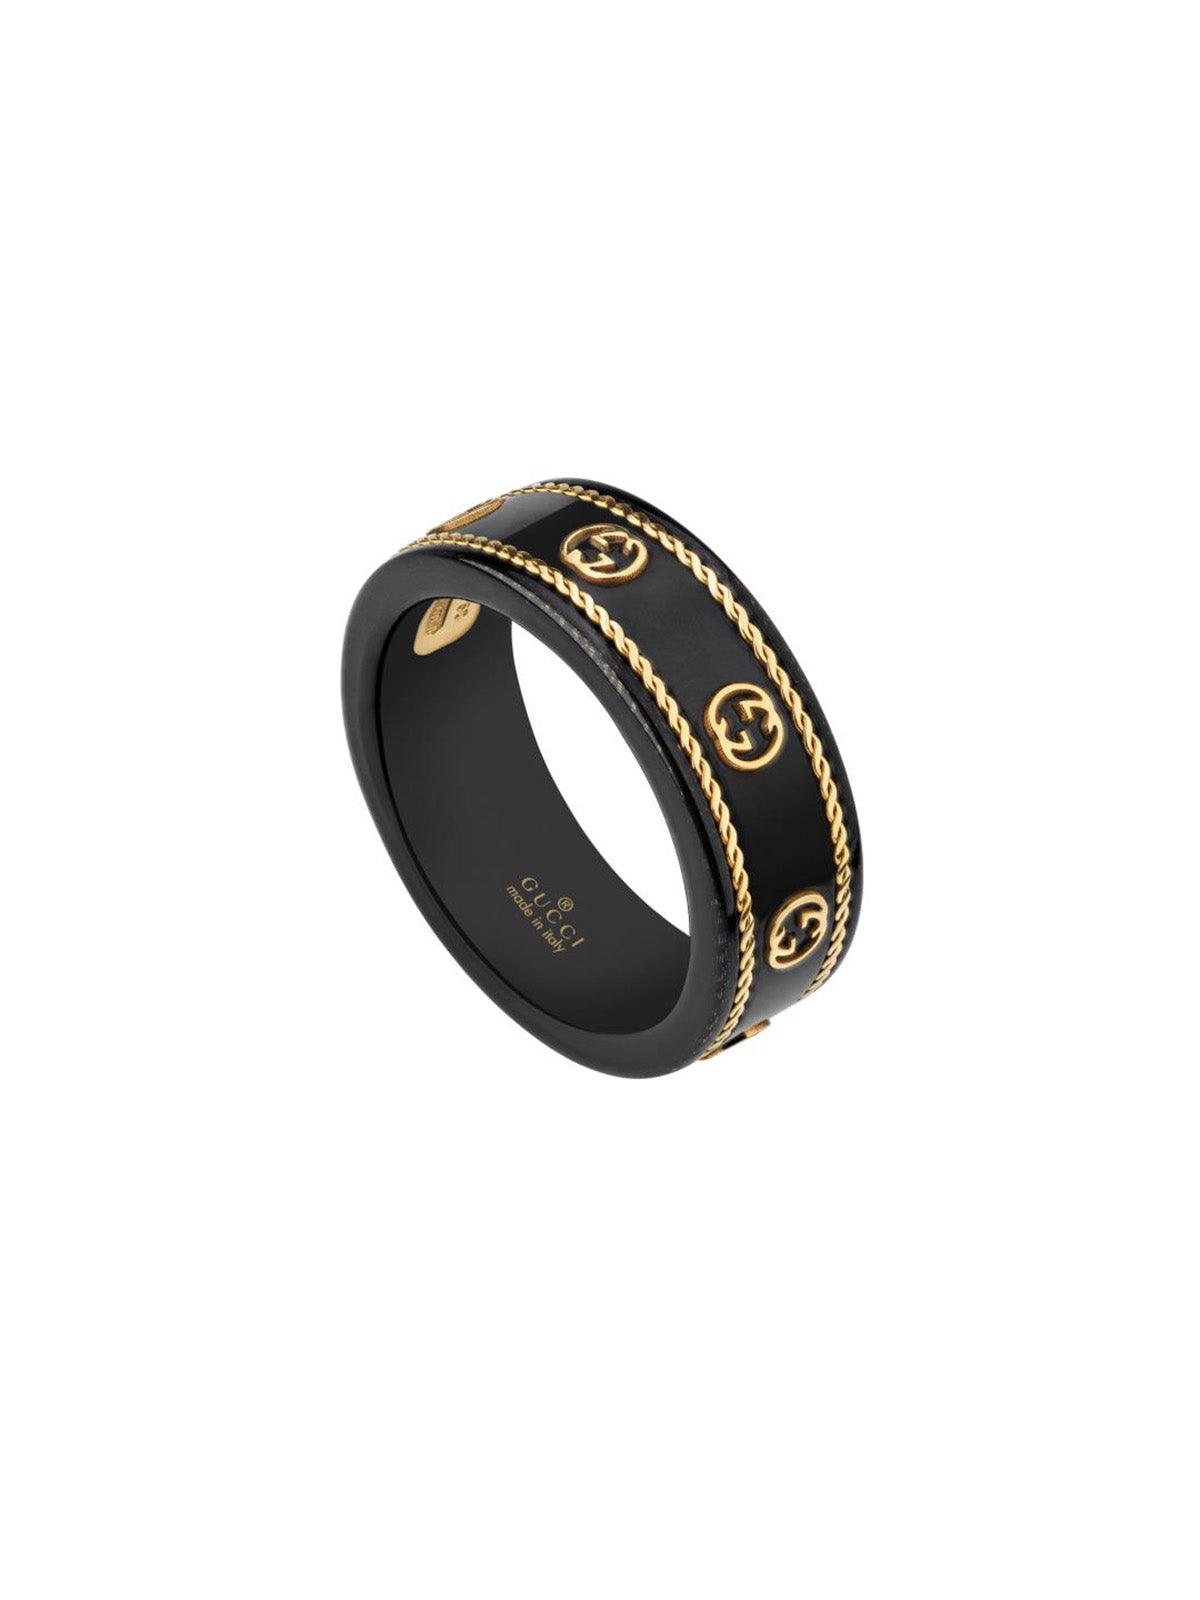 Gucci Icon Ring in Black and 18ct Yellow Gold - Size 22